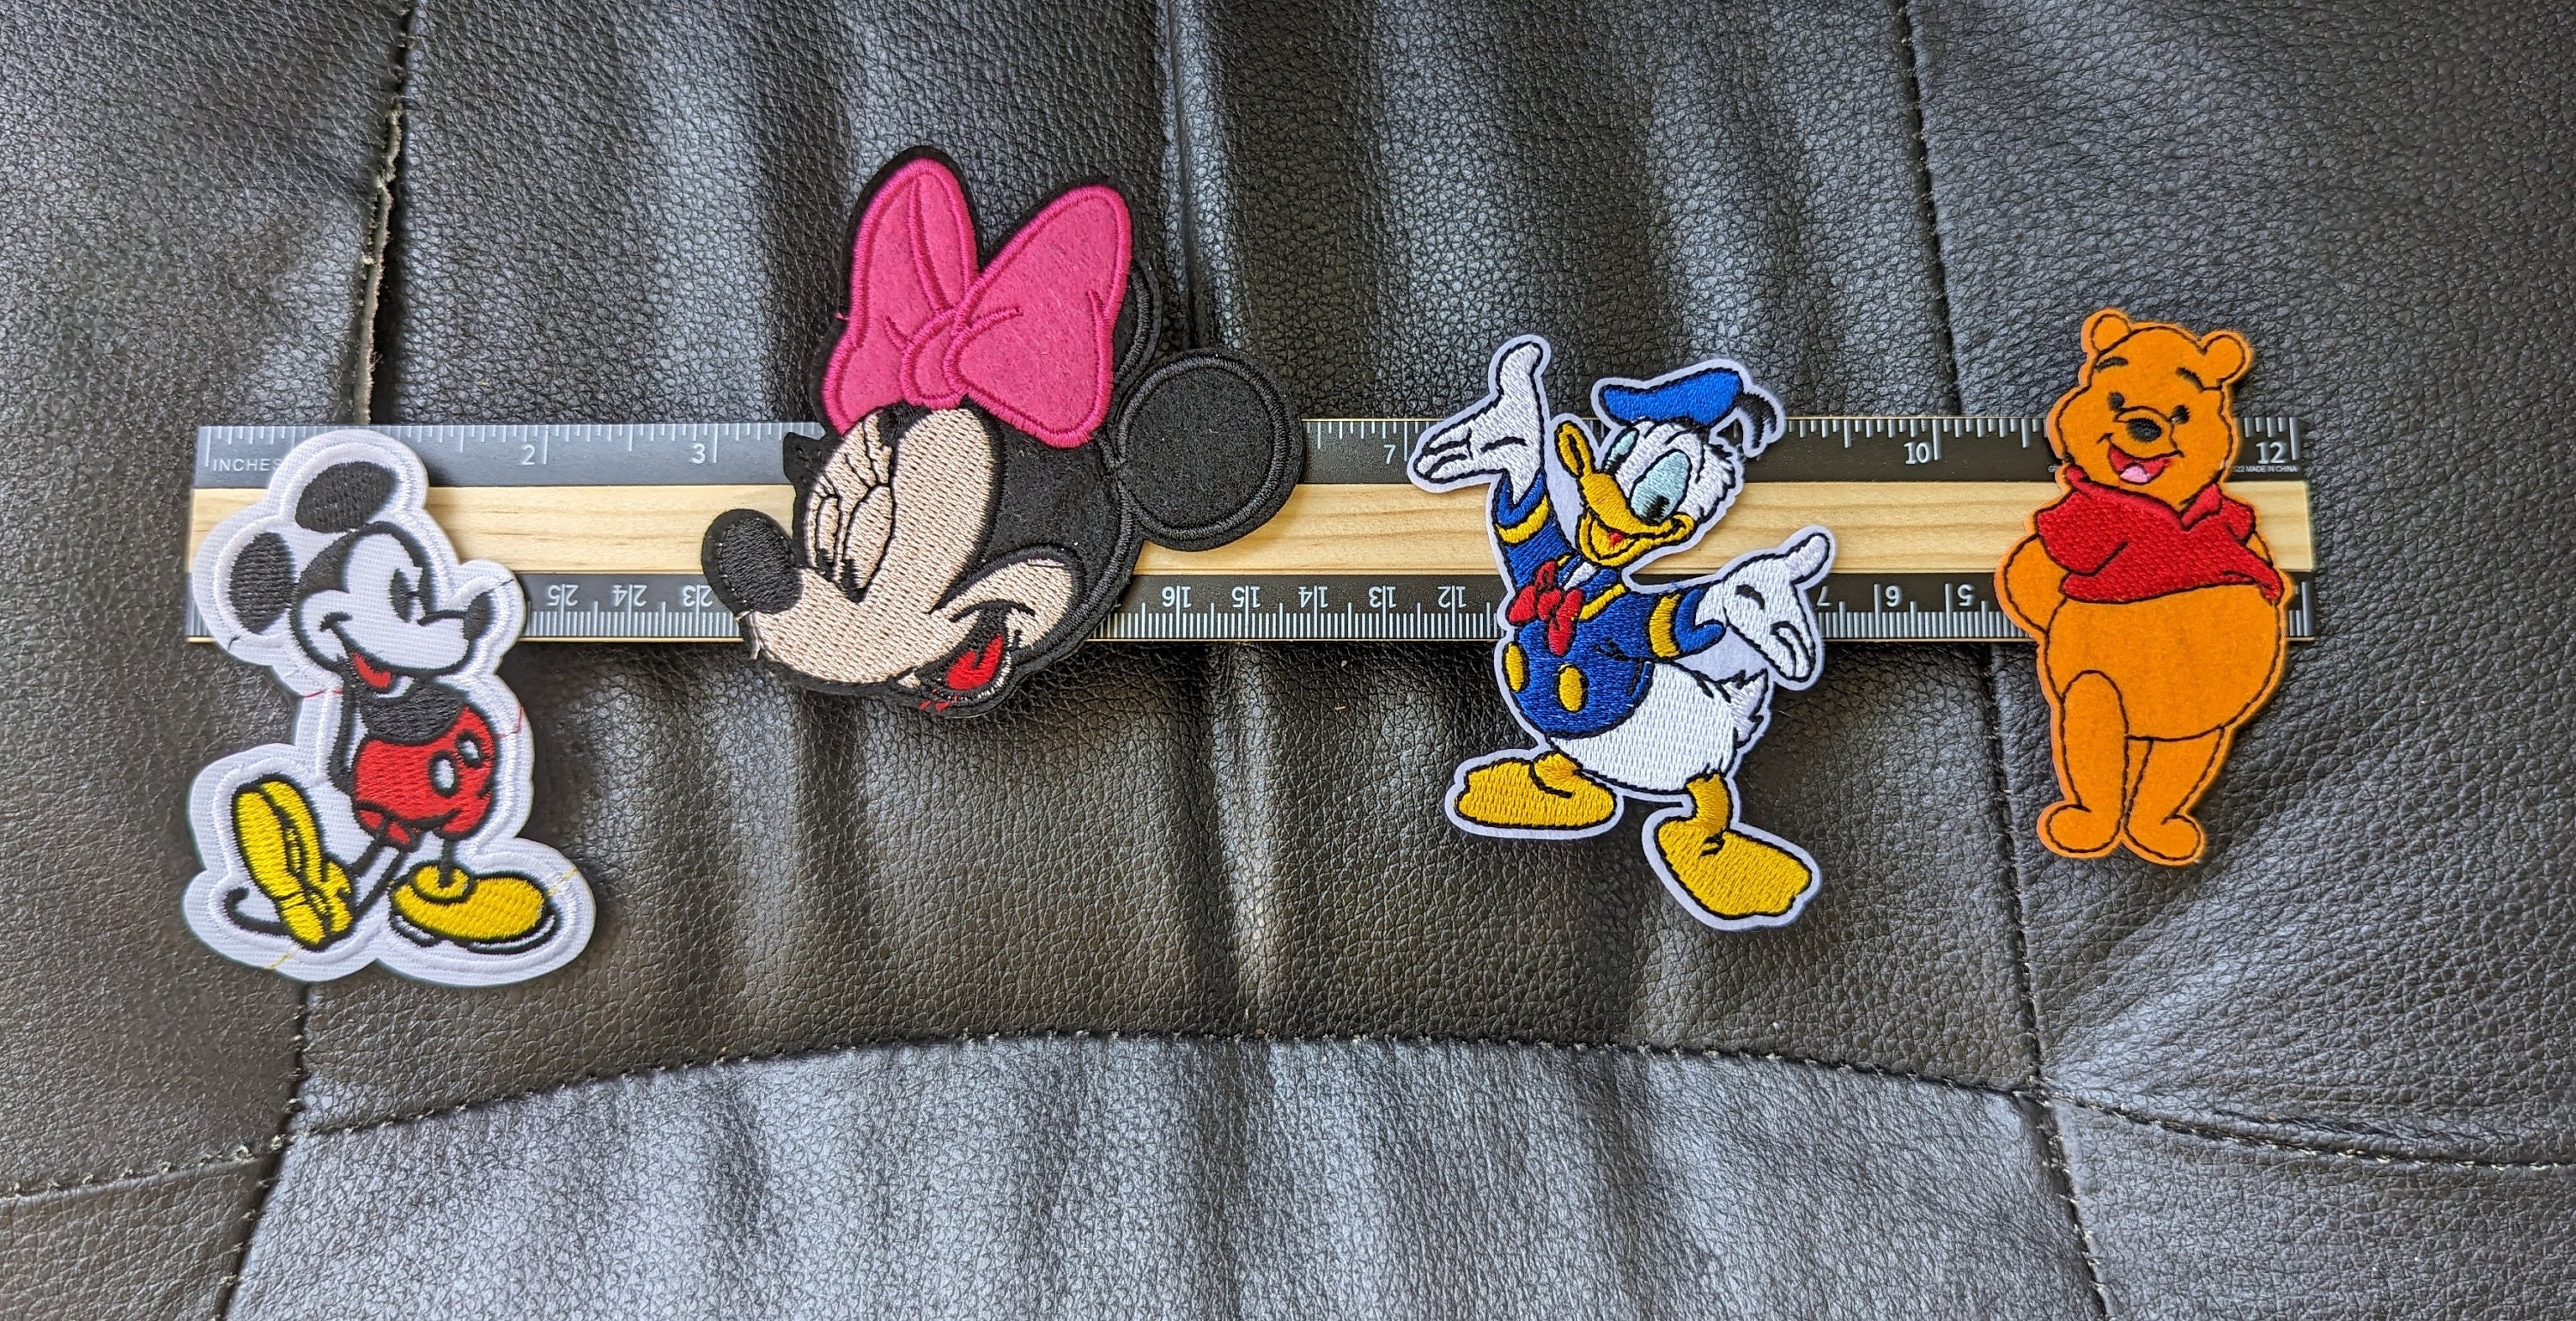 Retro Mickey Mouse Patch Classic Disney Fan Cartoon Character Iron-on  Applique 